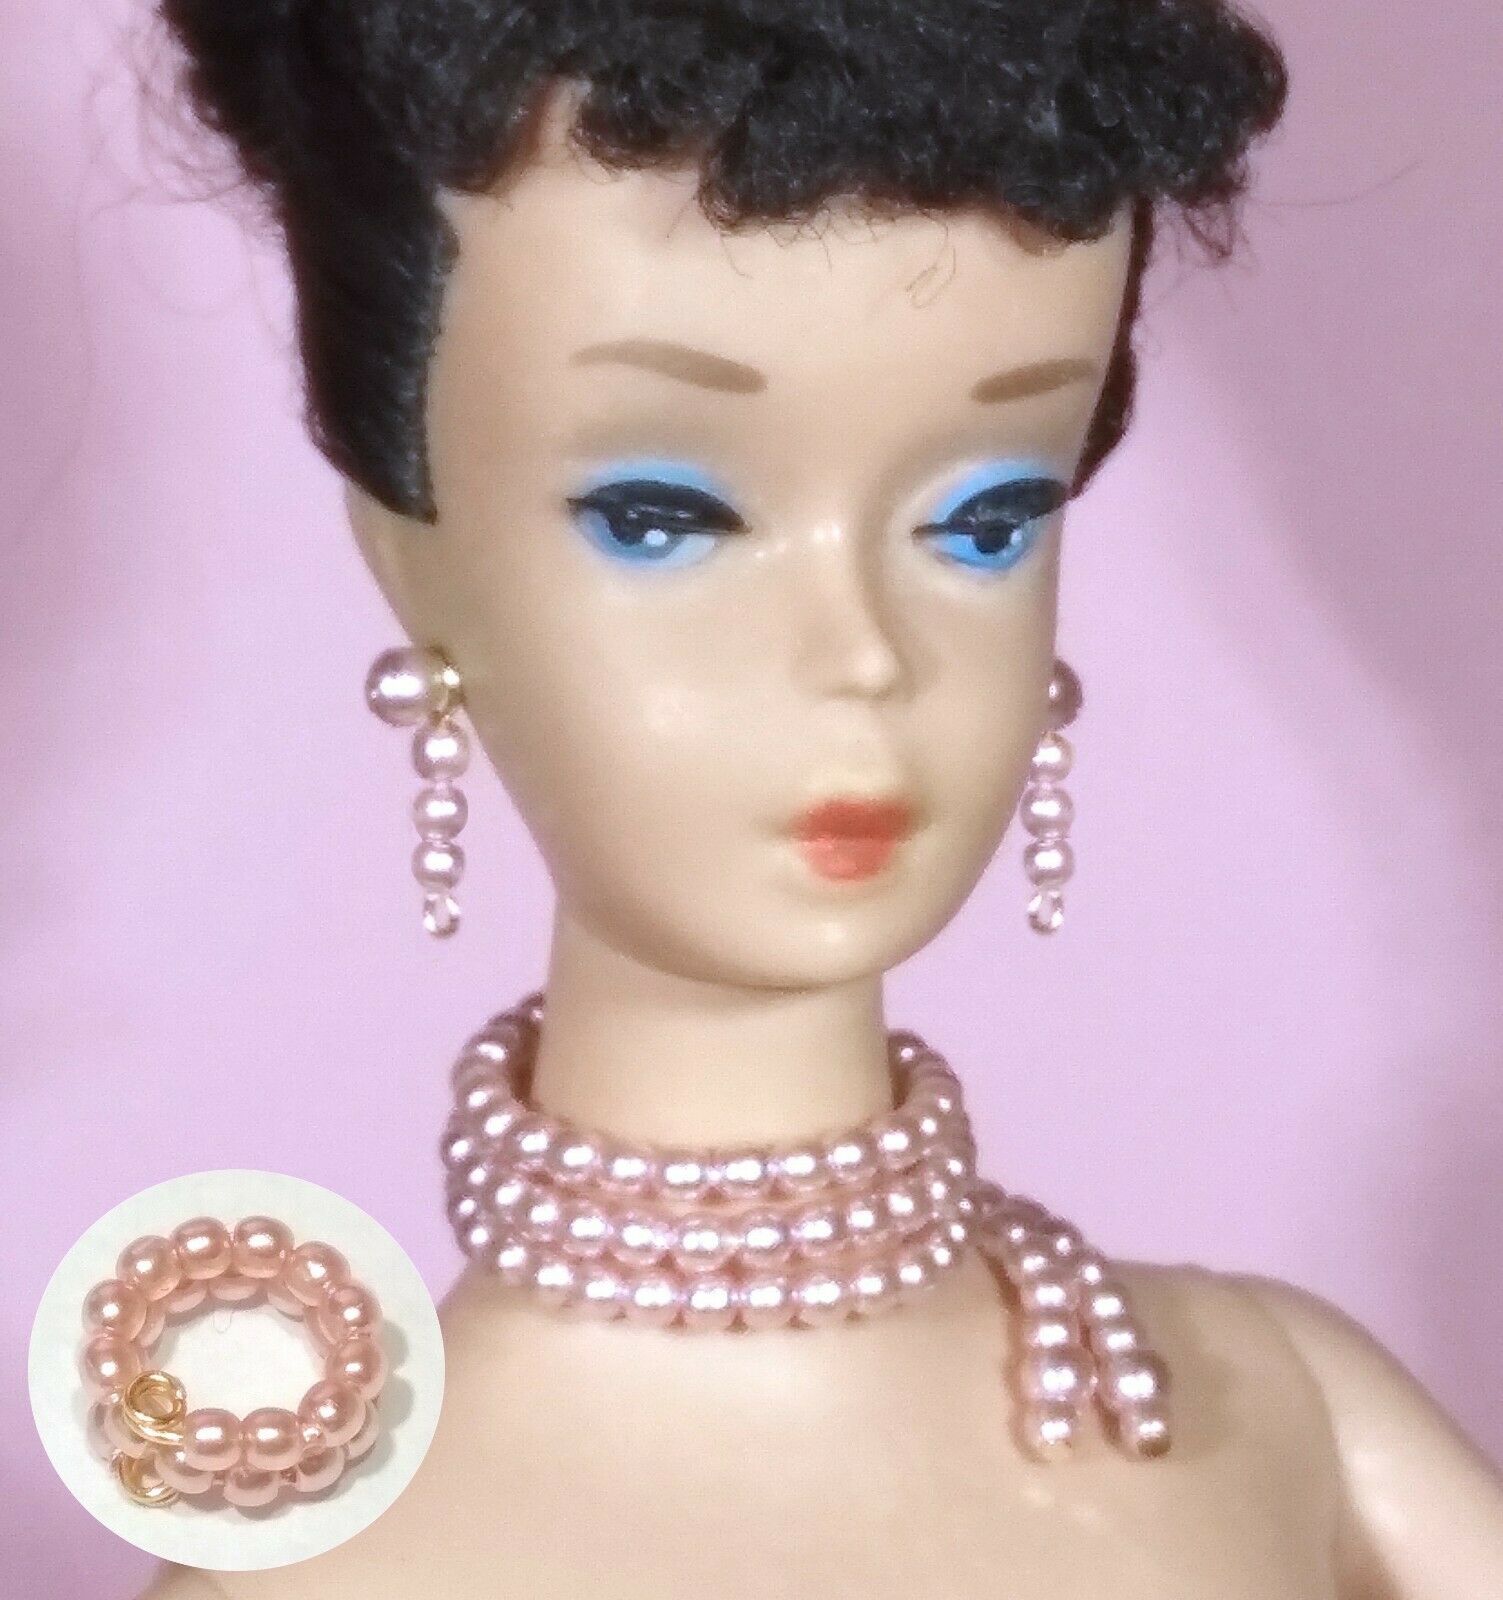 Dreamz Pink Pearl Necklace Enchanted Evening Vintage Repro For Barbie Doll